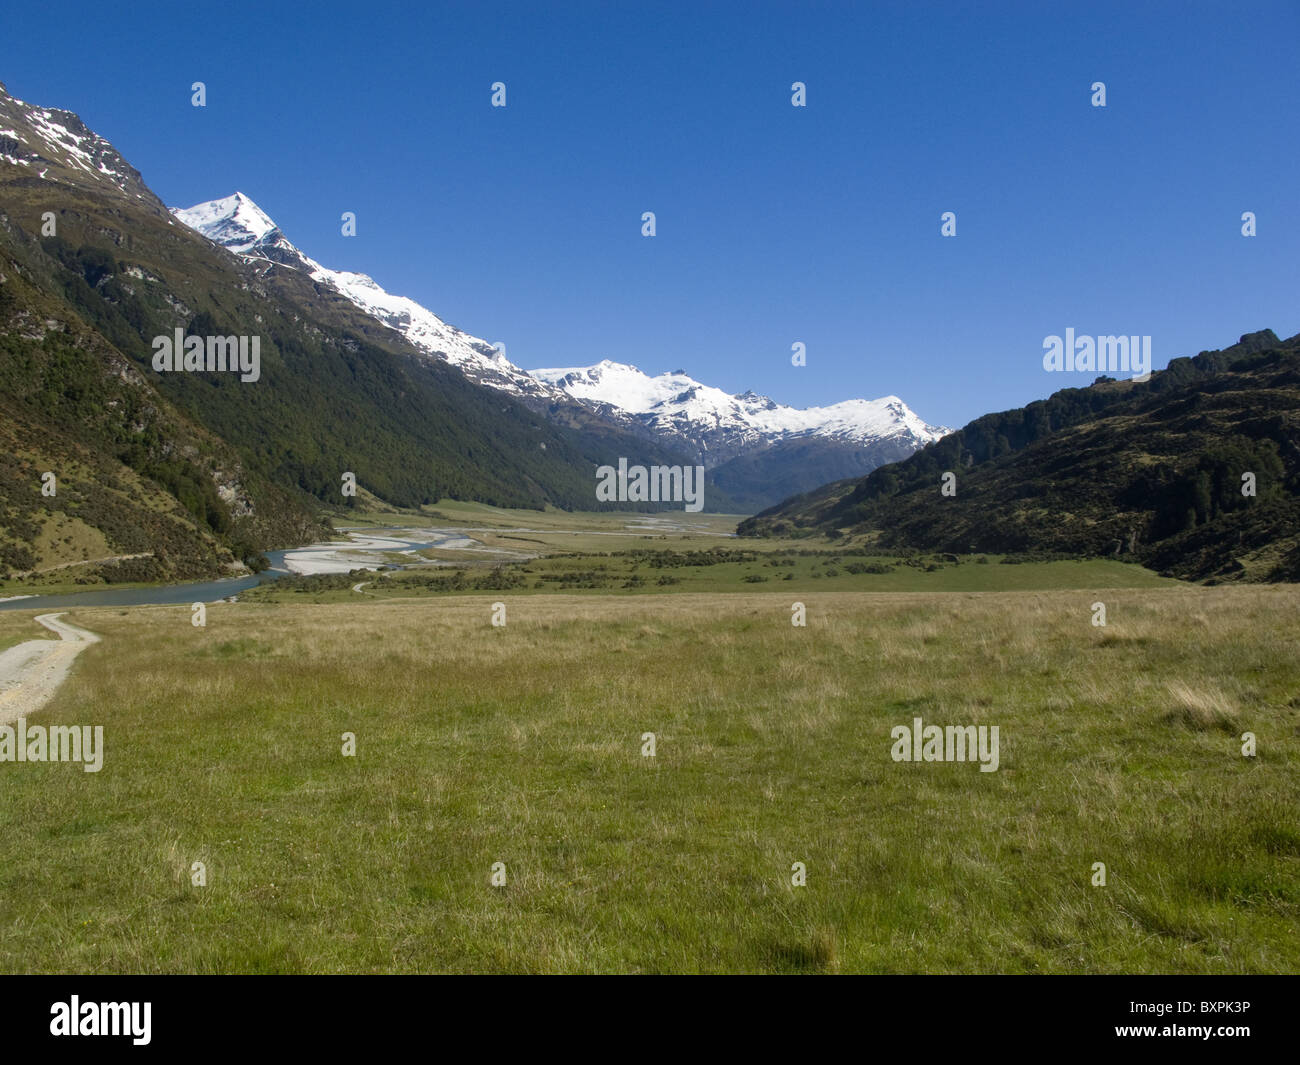 The floor of the Rees Valley is shown as wide and flat, with the snow-capped peaks of the Southern Alps high above Stock Photo